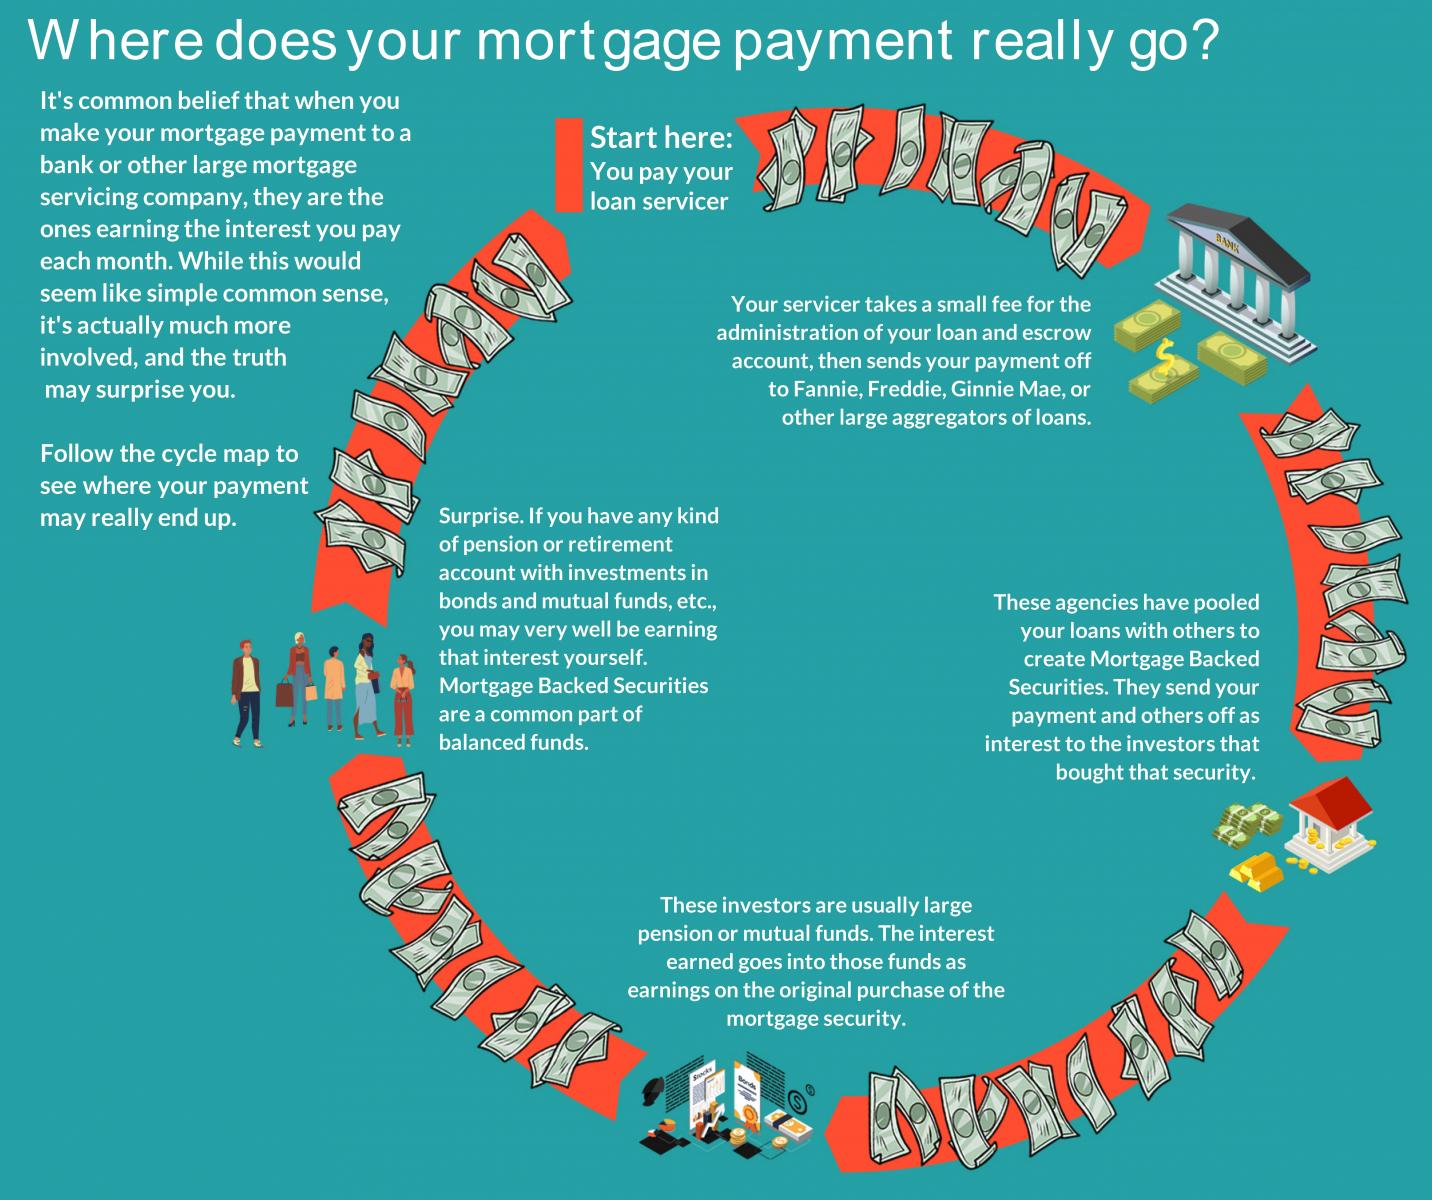 where does your mortgage payment really go?